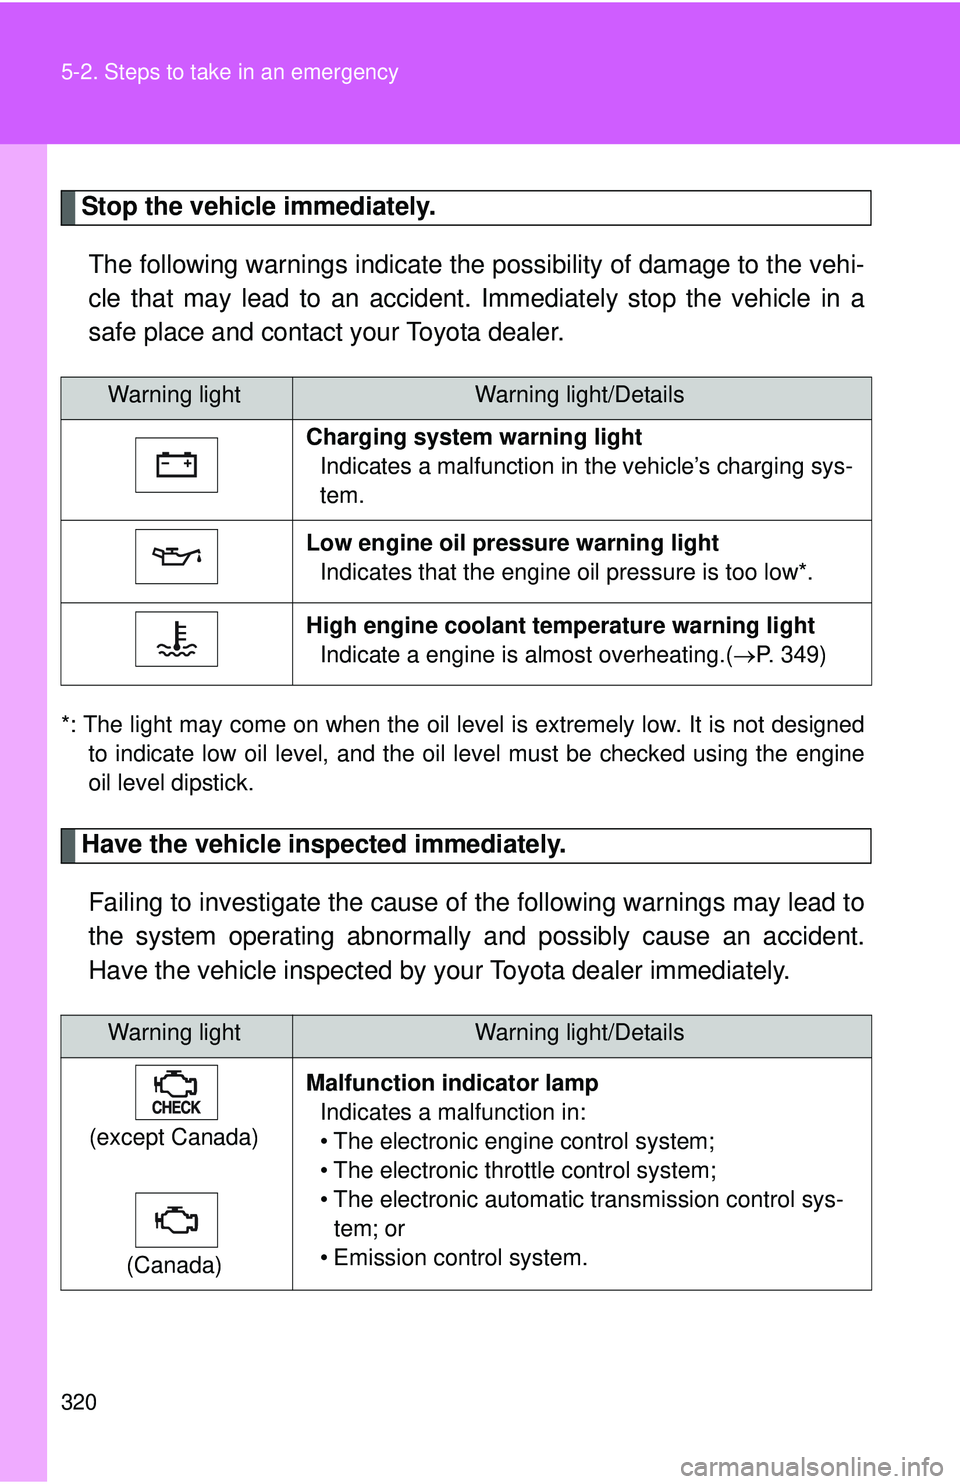 TOYOTA YARIS HATCHBACK 2011  Owners Manual 320 5-2. Steps to take in an emergency
Stop the vehicle immediately.The following warnings indicate the possibility of damage to the vehi-
cle that may lead to an accident. Immediately stop the vehicl